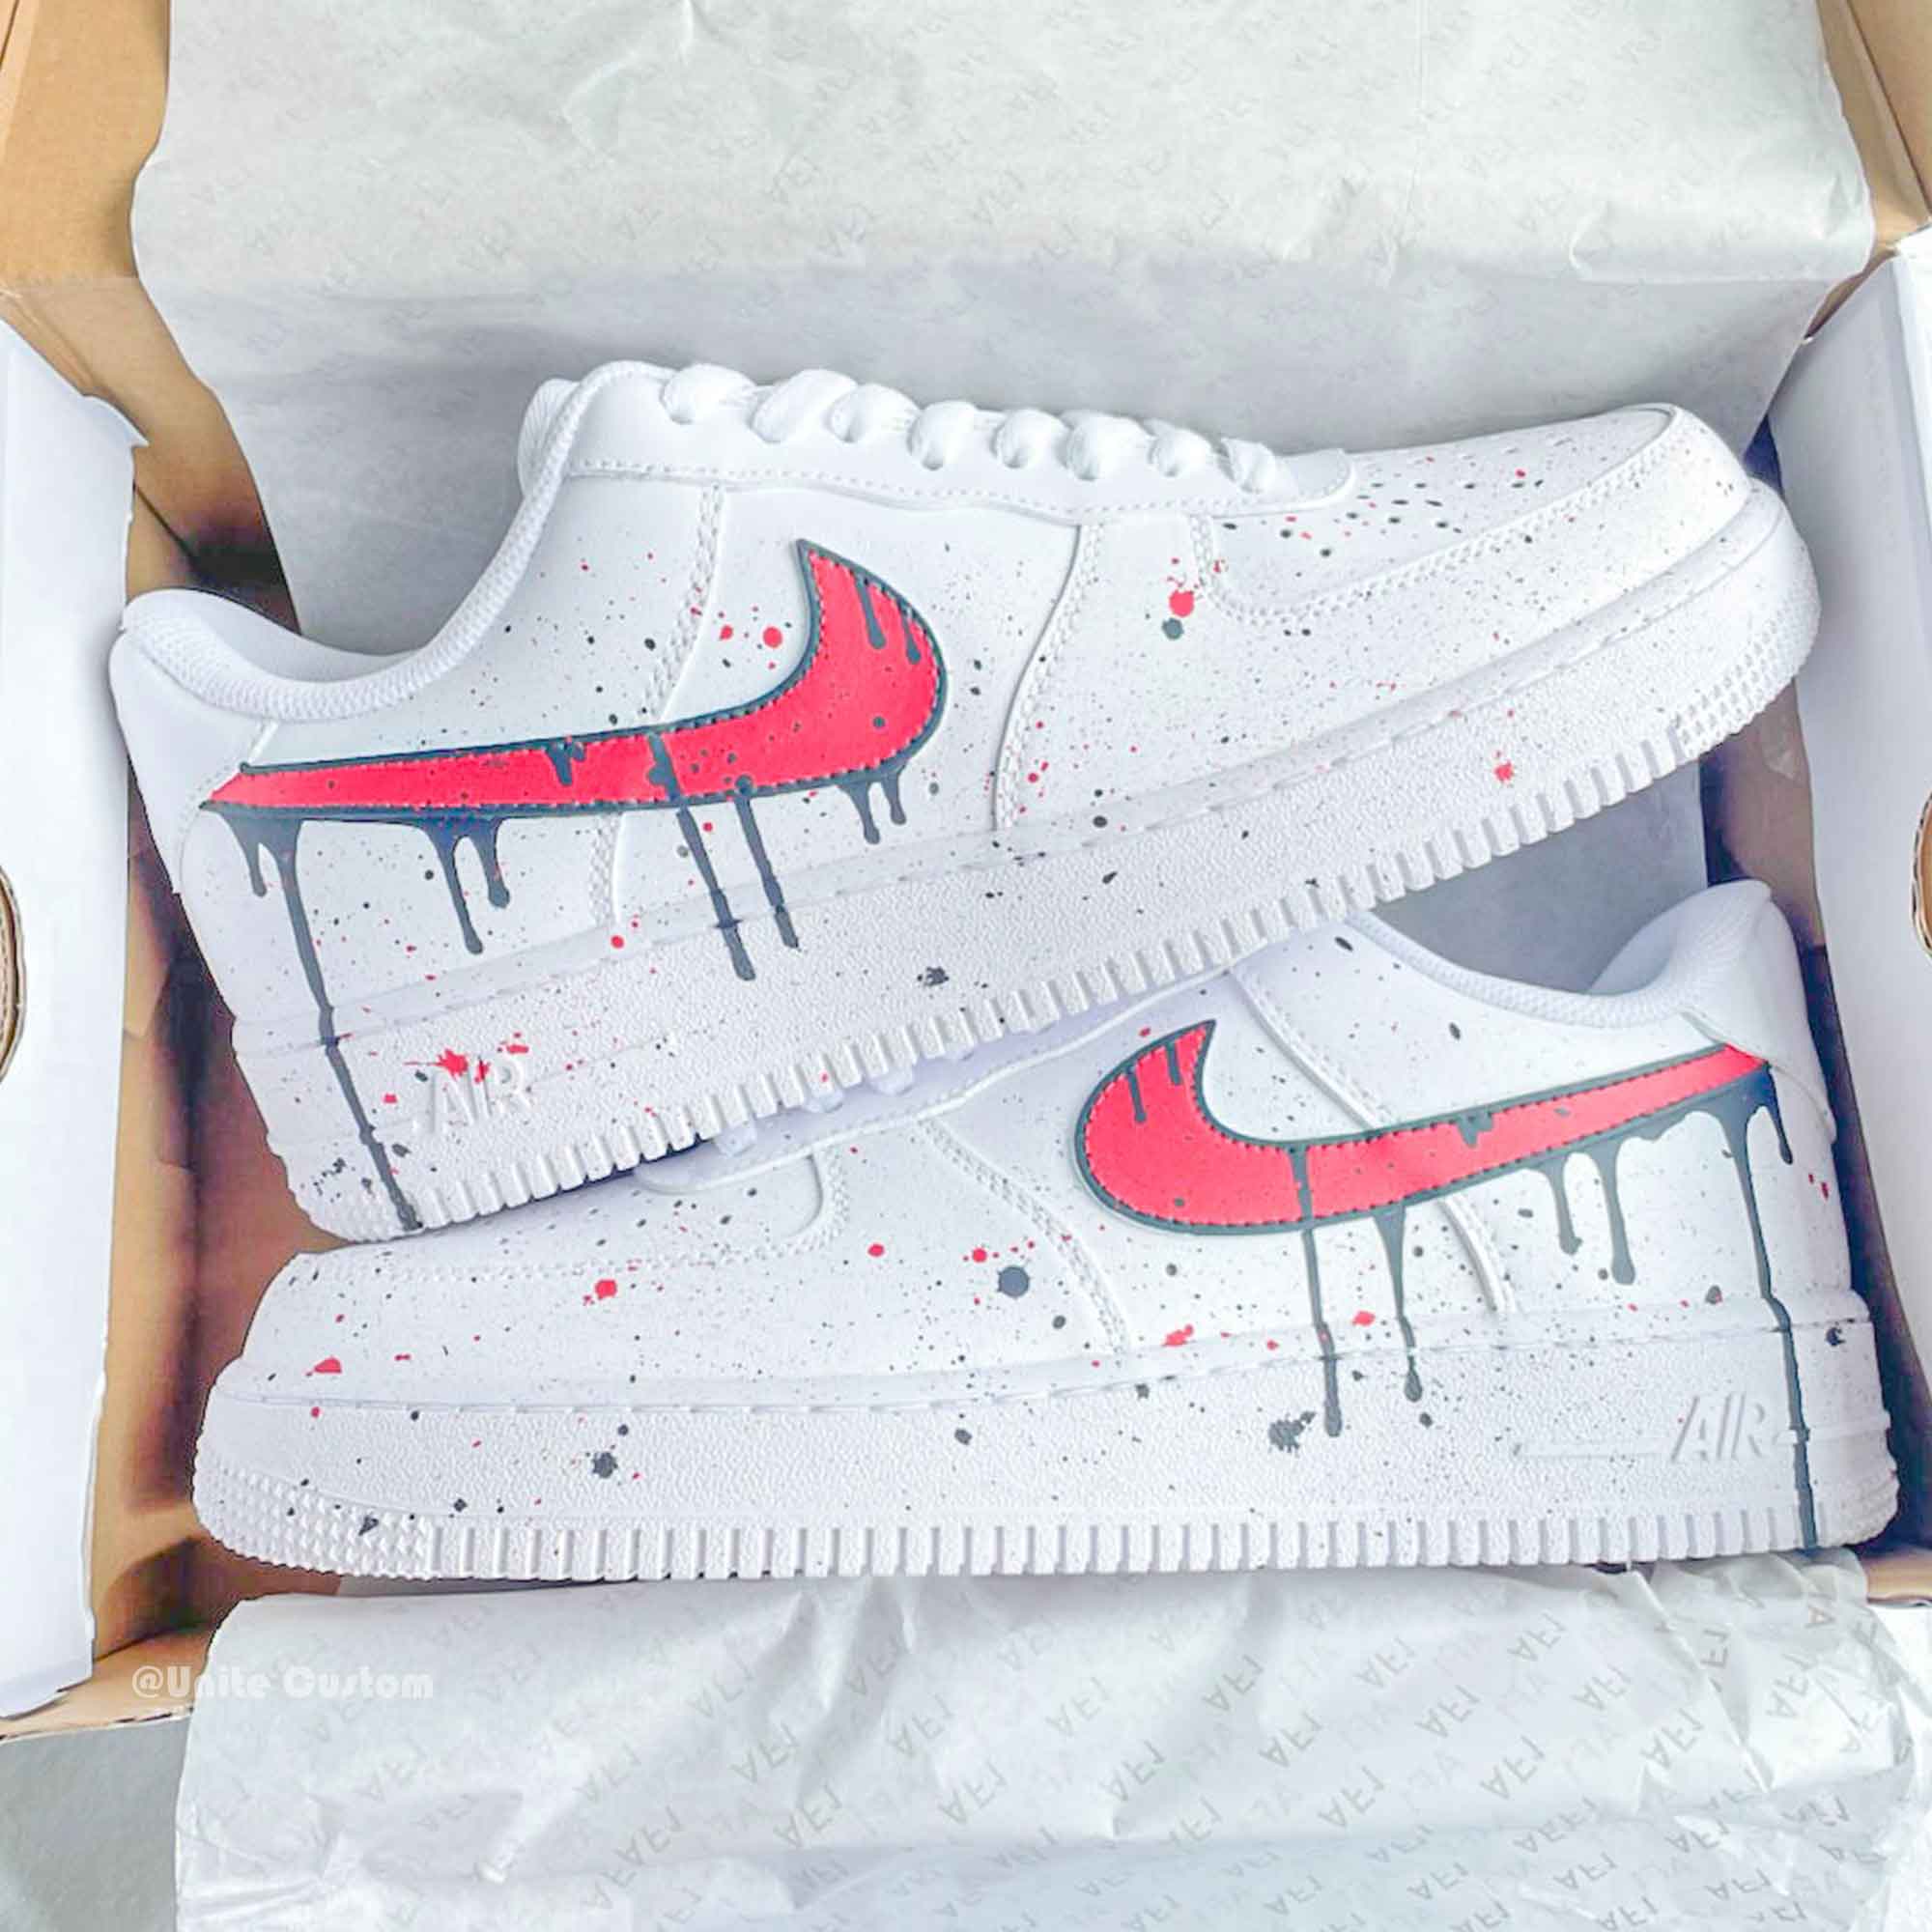 Nike Air Force 1 Custom Red and Blue Drip Splatter White Shoes USA